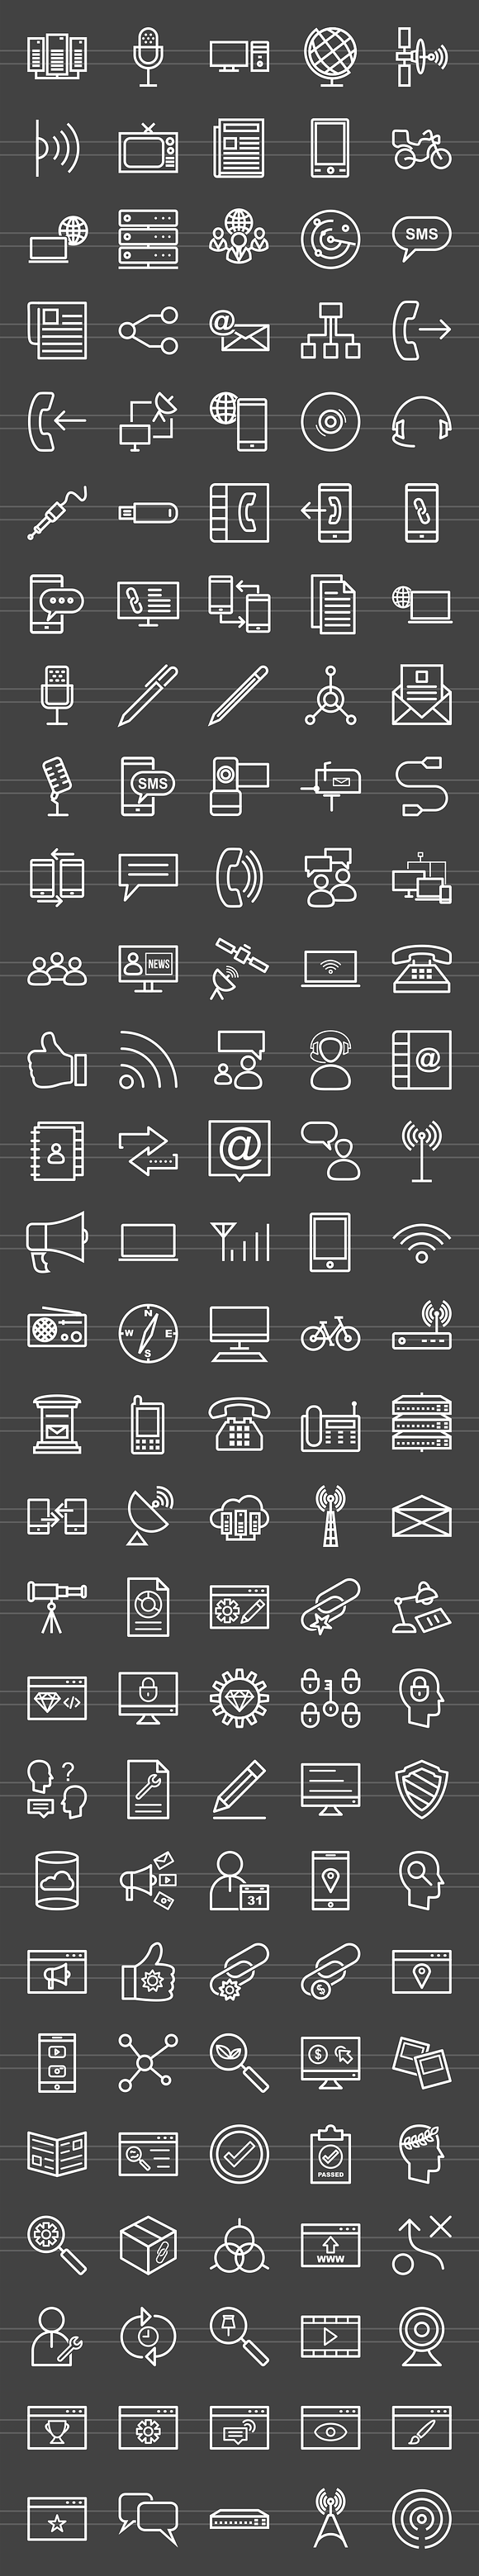 141 IT & Communication Line Icons in Graphics - product preview 1